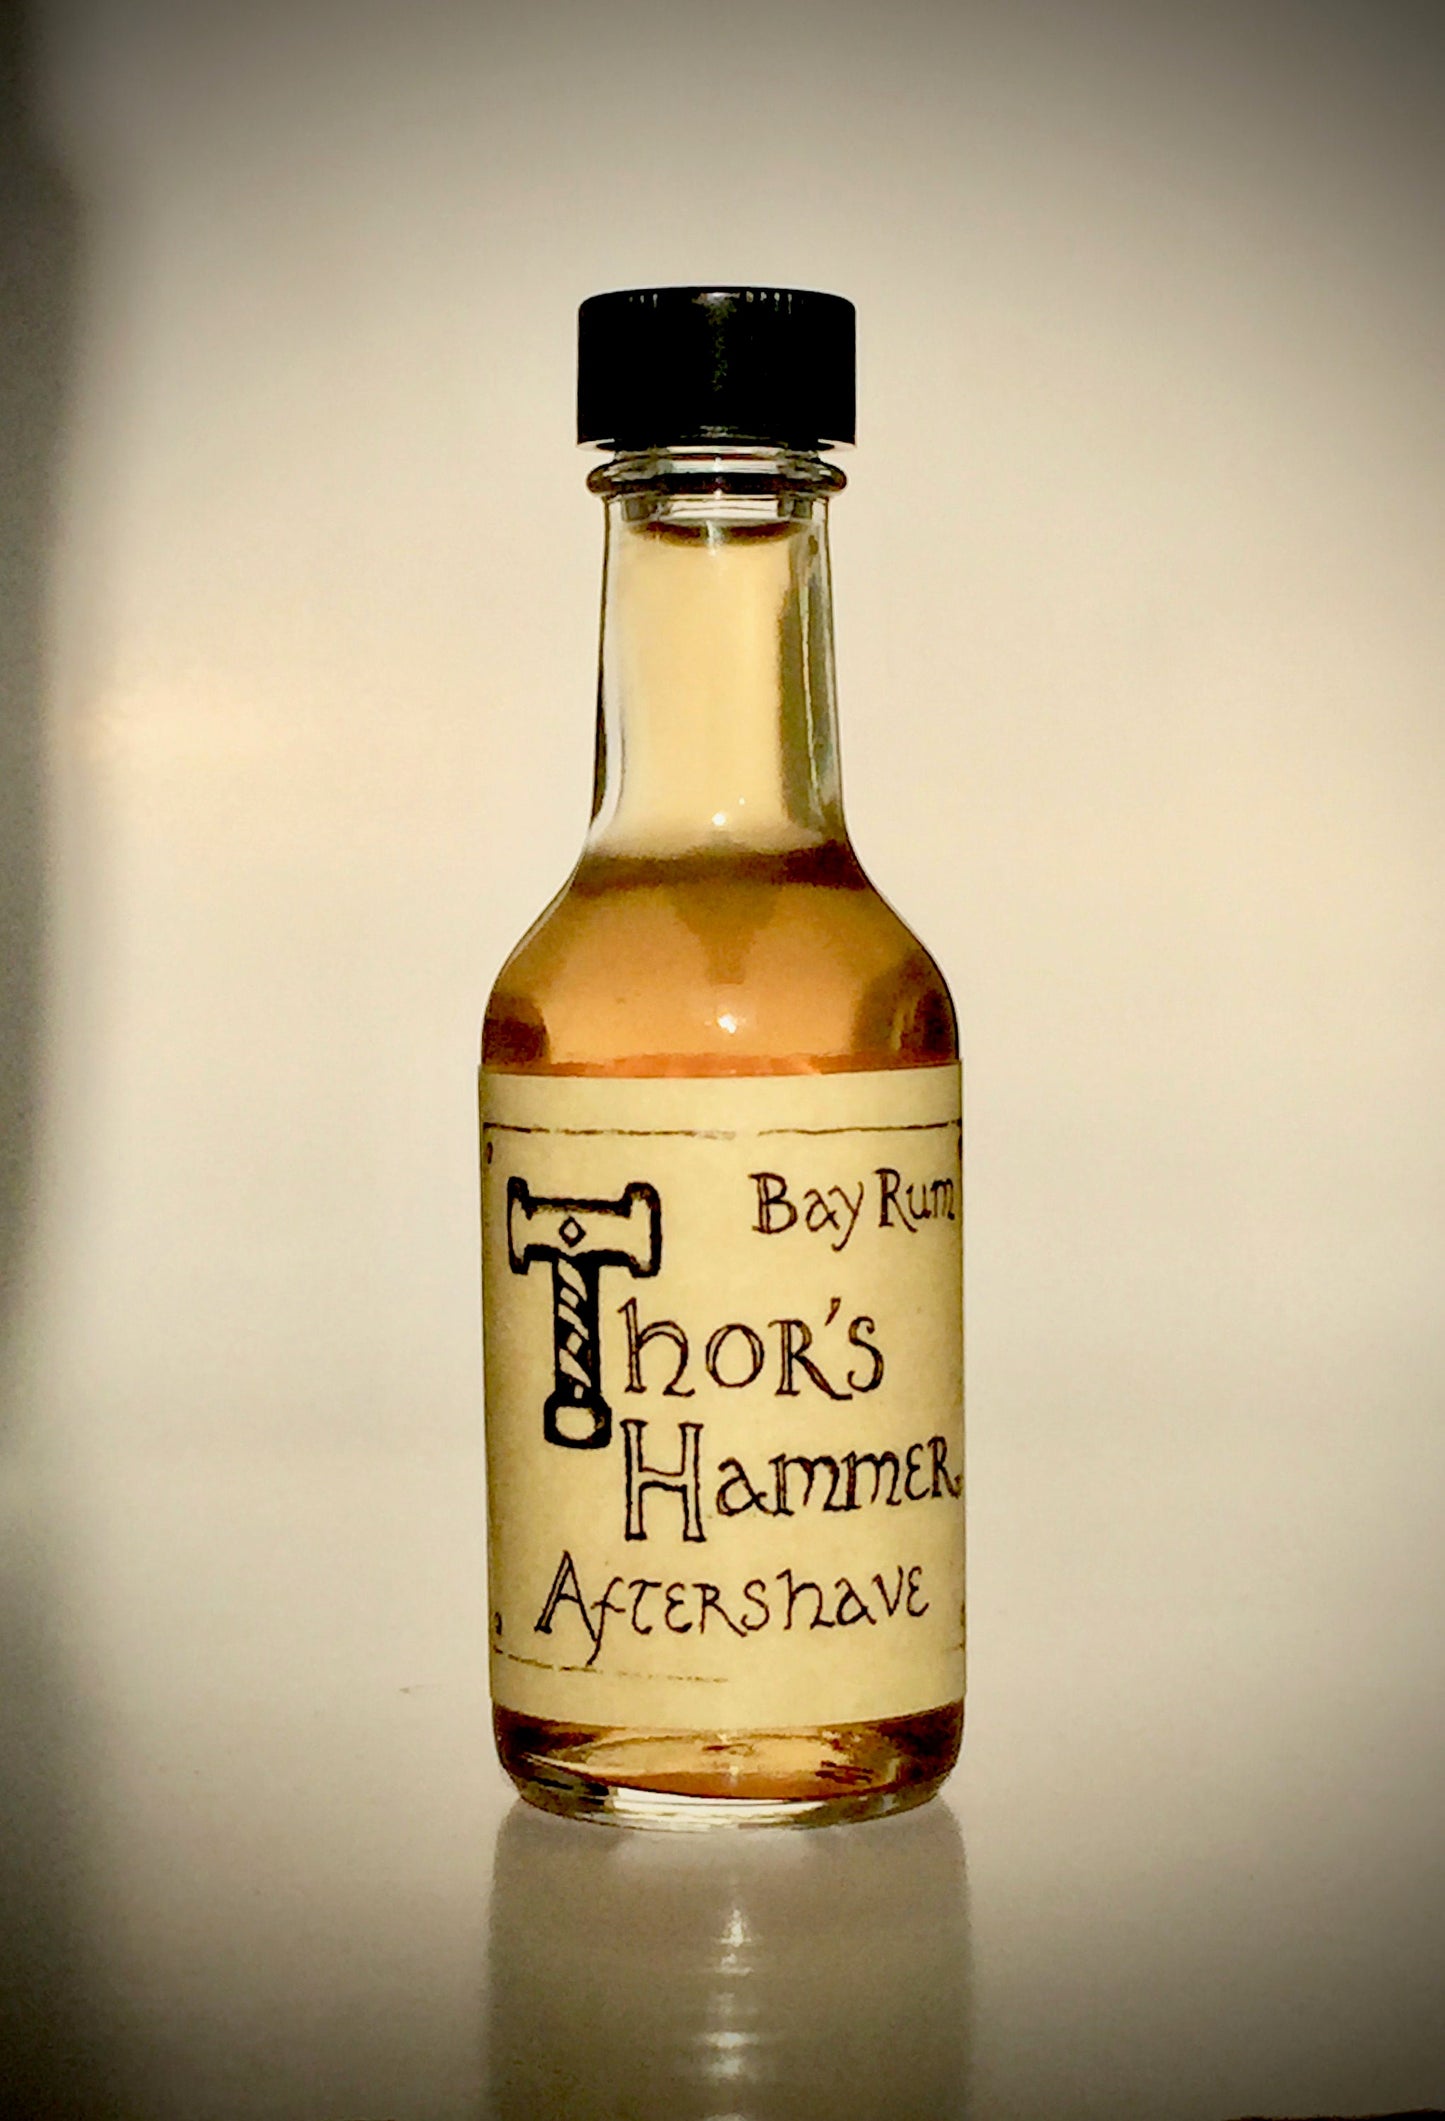 Spice Aftershave | Thor's Hammer Nordic Spice | Viking Aftershave | New Spice | Spicy + Minty